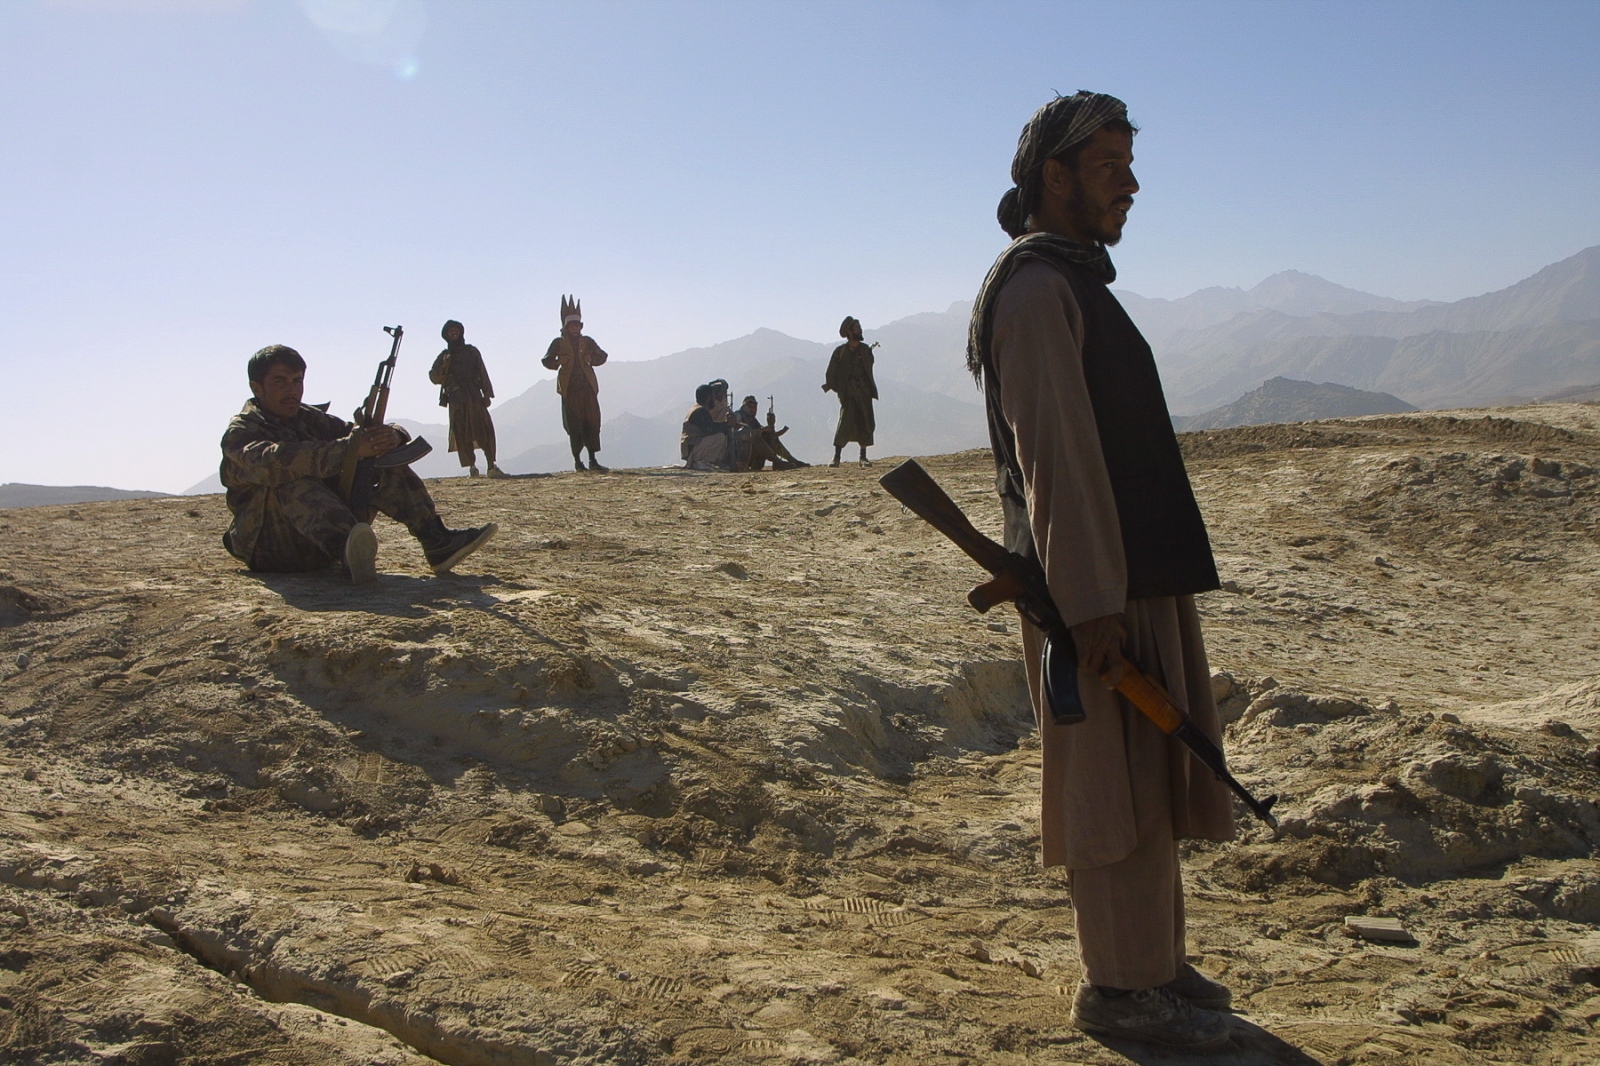 Onward to Kabul - Northern Alliance soldiers wait for the signal to join...